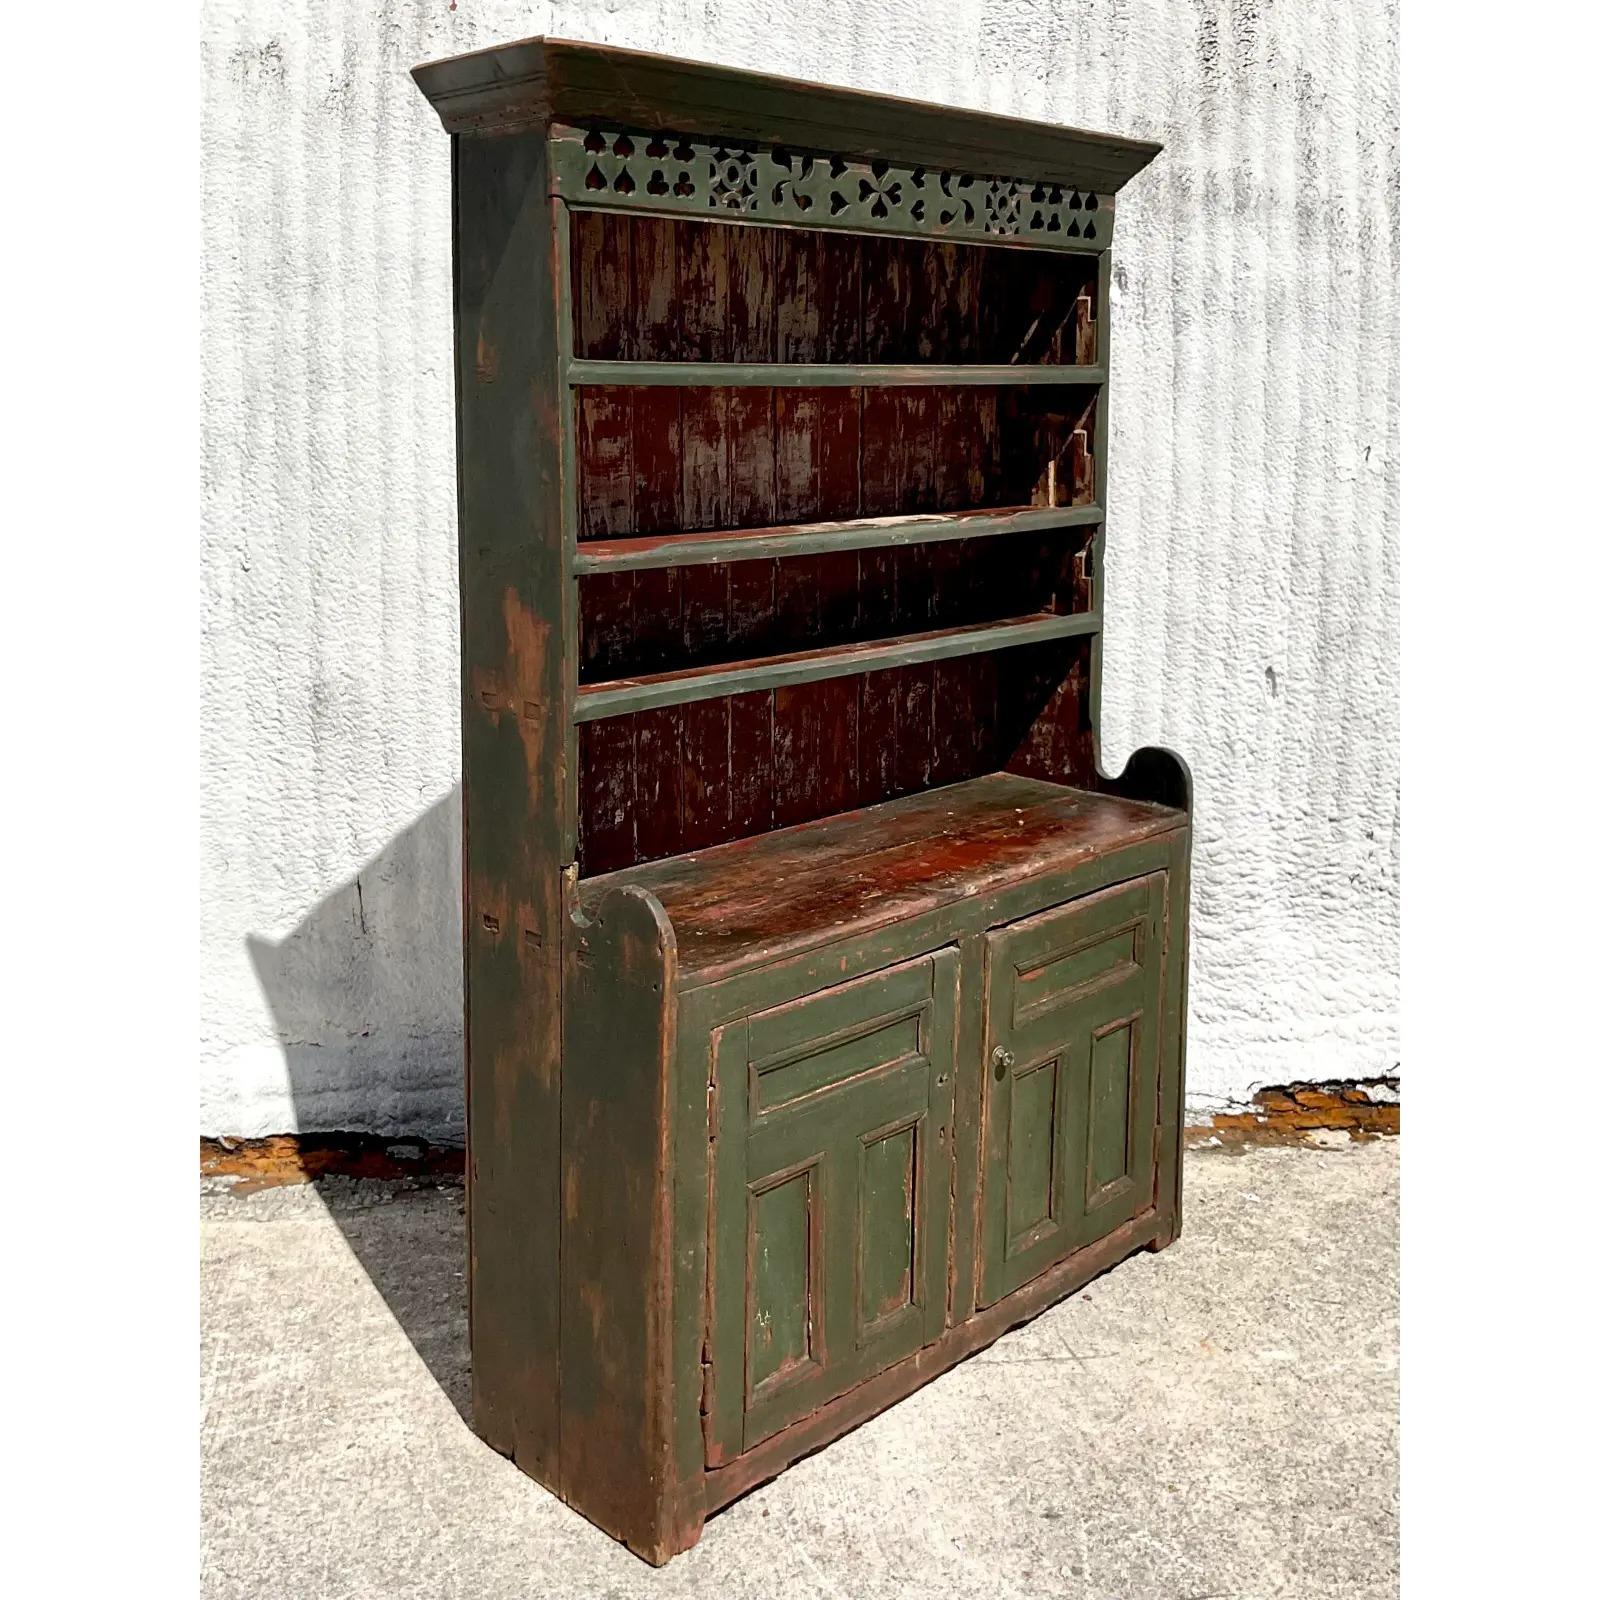 Stunning vintage Irish Rustic China cabinet. Hand made from a rustic distressed wood with a deep green color. Lots of great patina from time. Acquired from a Palm Beach estate.

The cabinet is in great vintage condition. Scuffs, cracks and blemishes